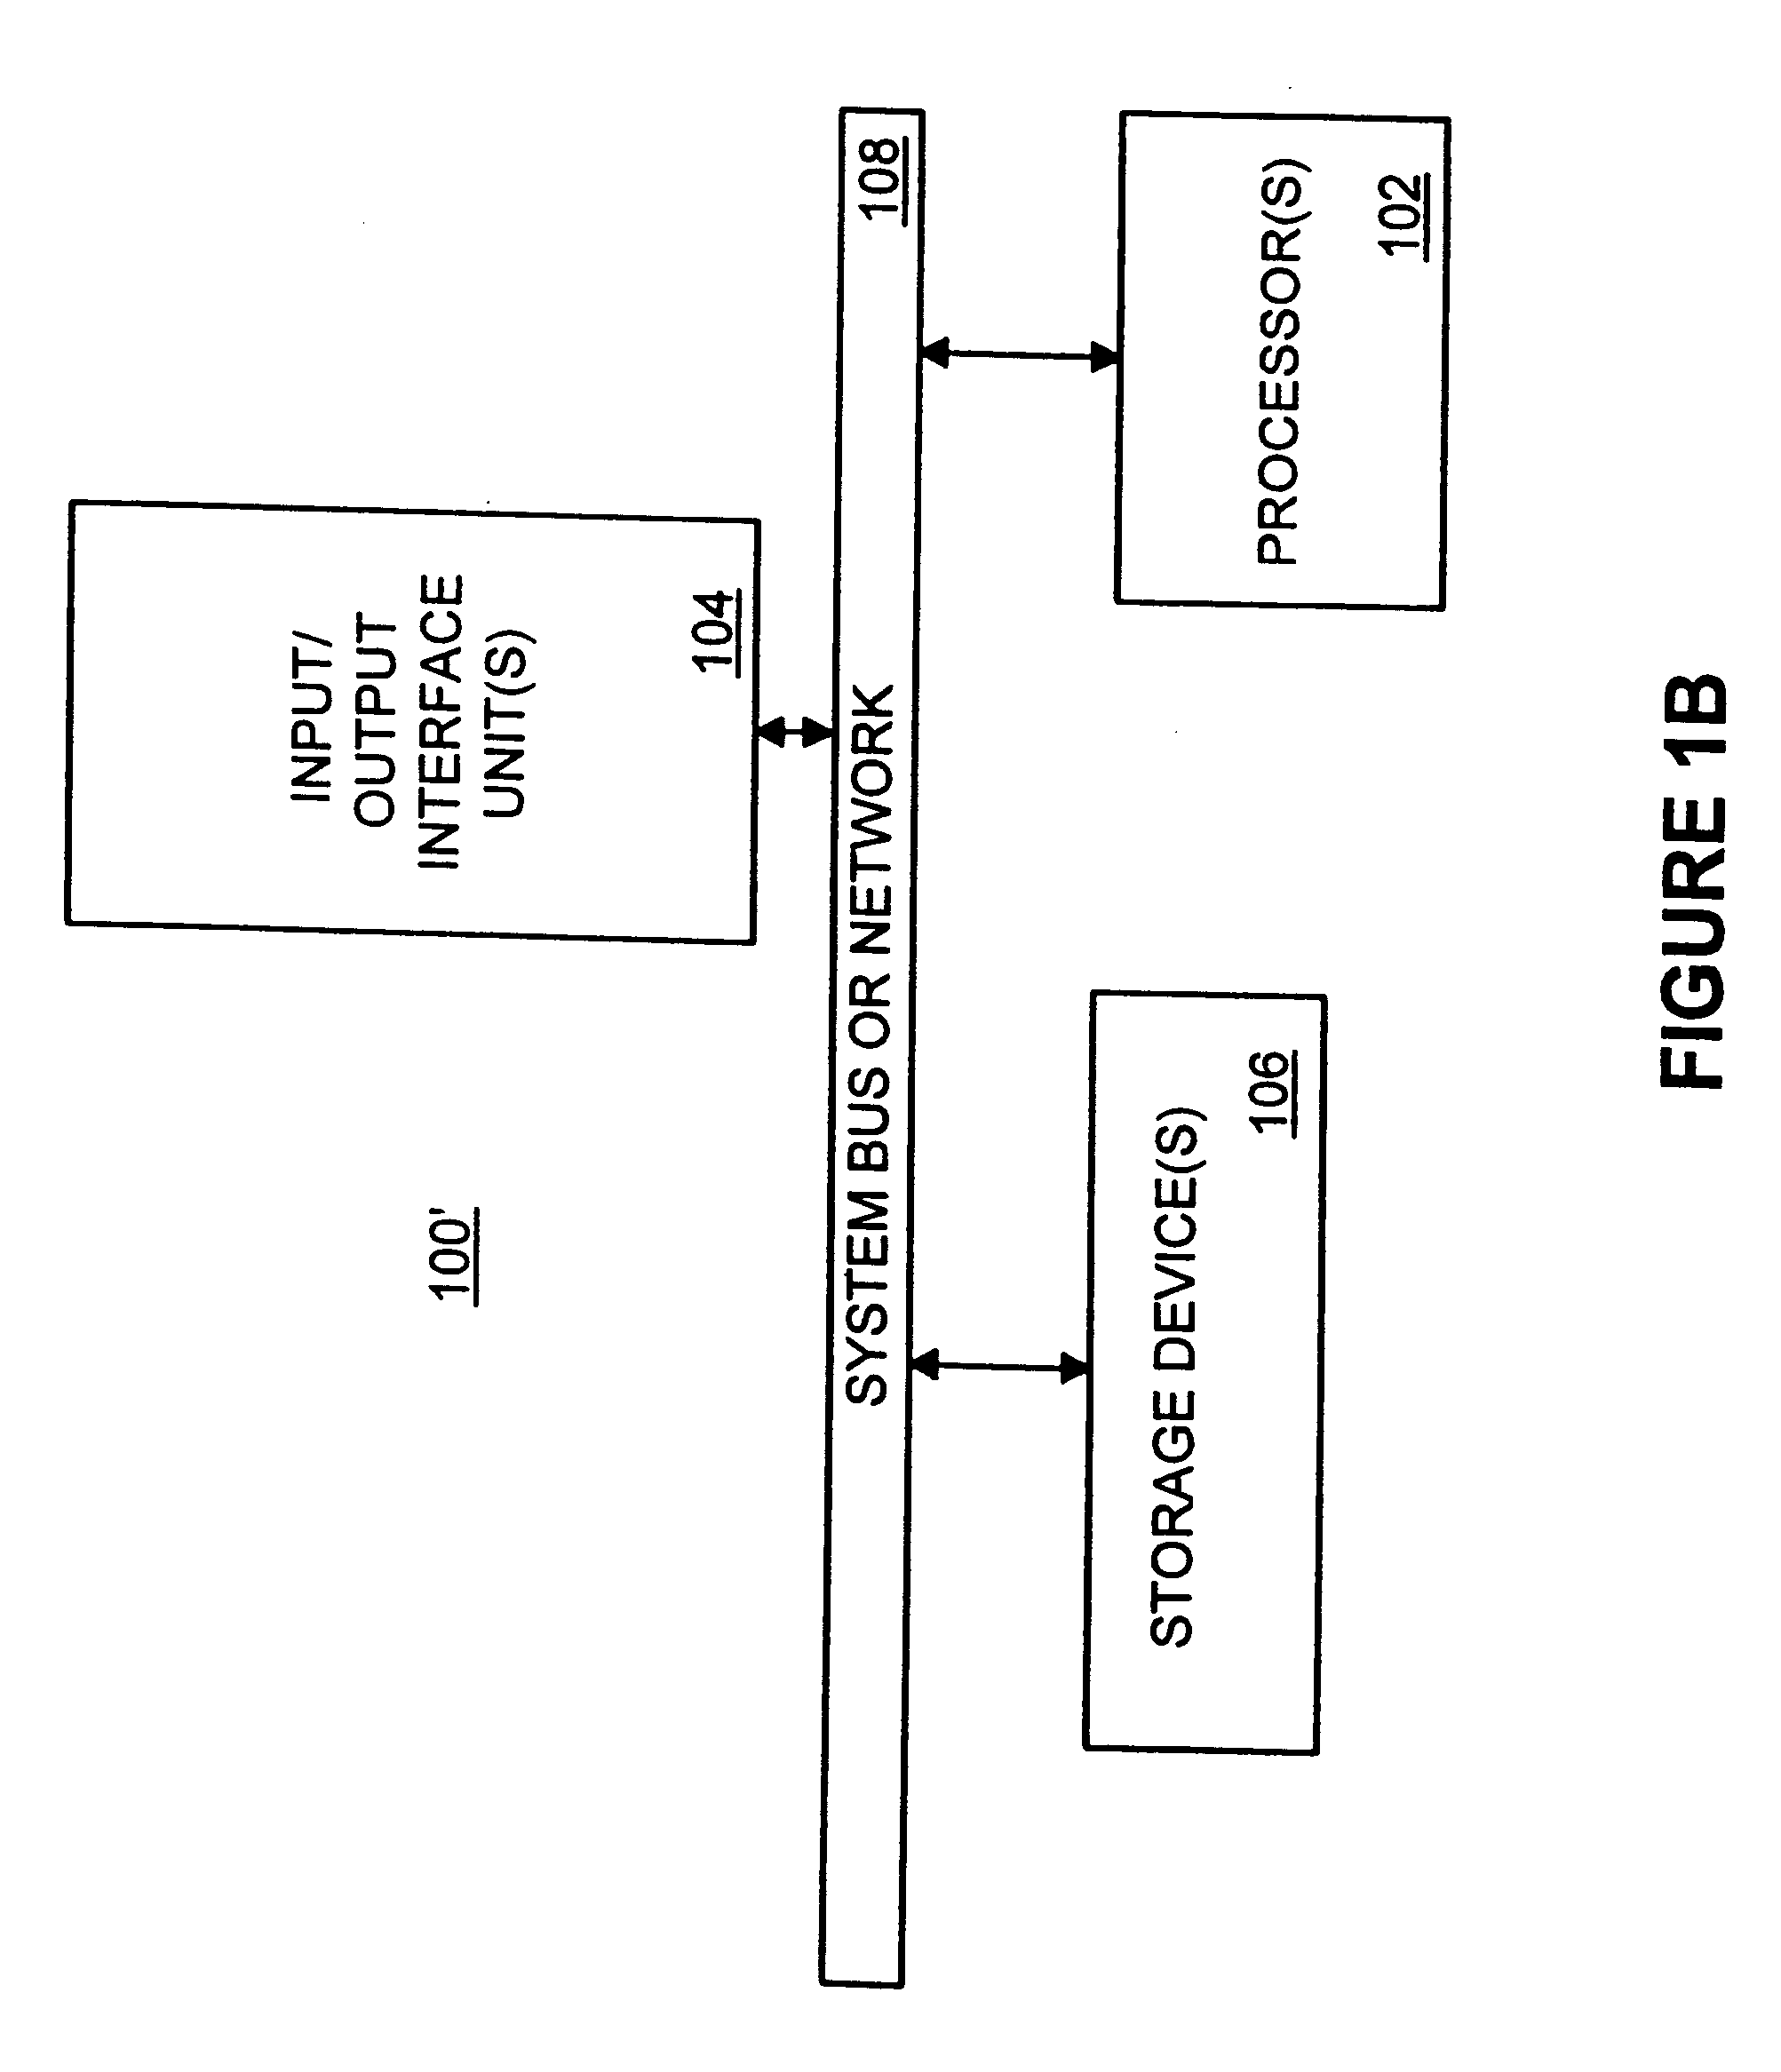 Methods, apparatus and data structures for providing a user interface, which exploits spatial memory in three-dimensions, to objects and which visually groups proximally located objects